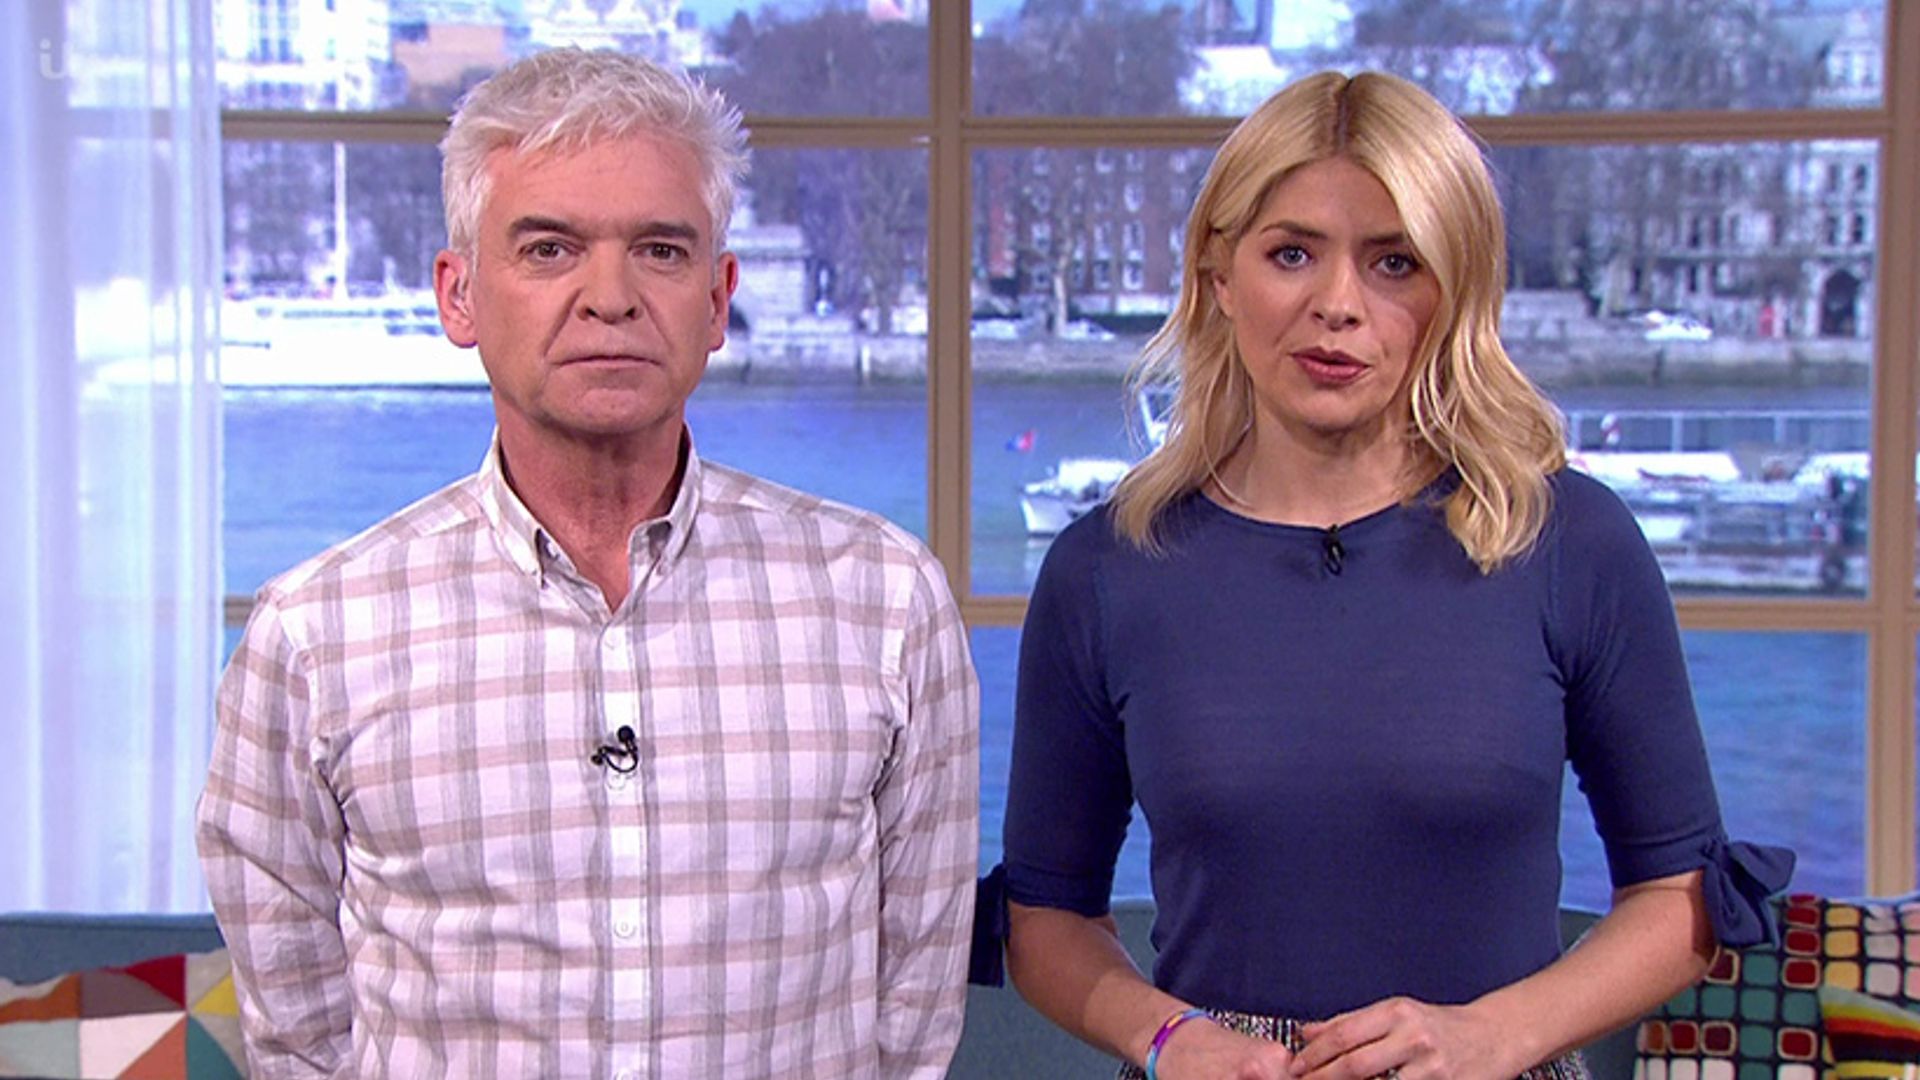 Holly Willoughby reveals why she didn't discuss Ant McPartlin's drink-driving incident on This Morning